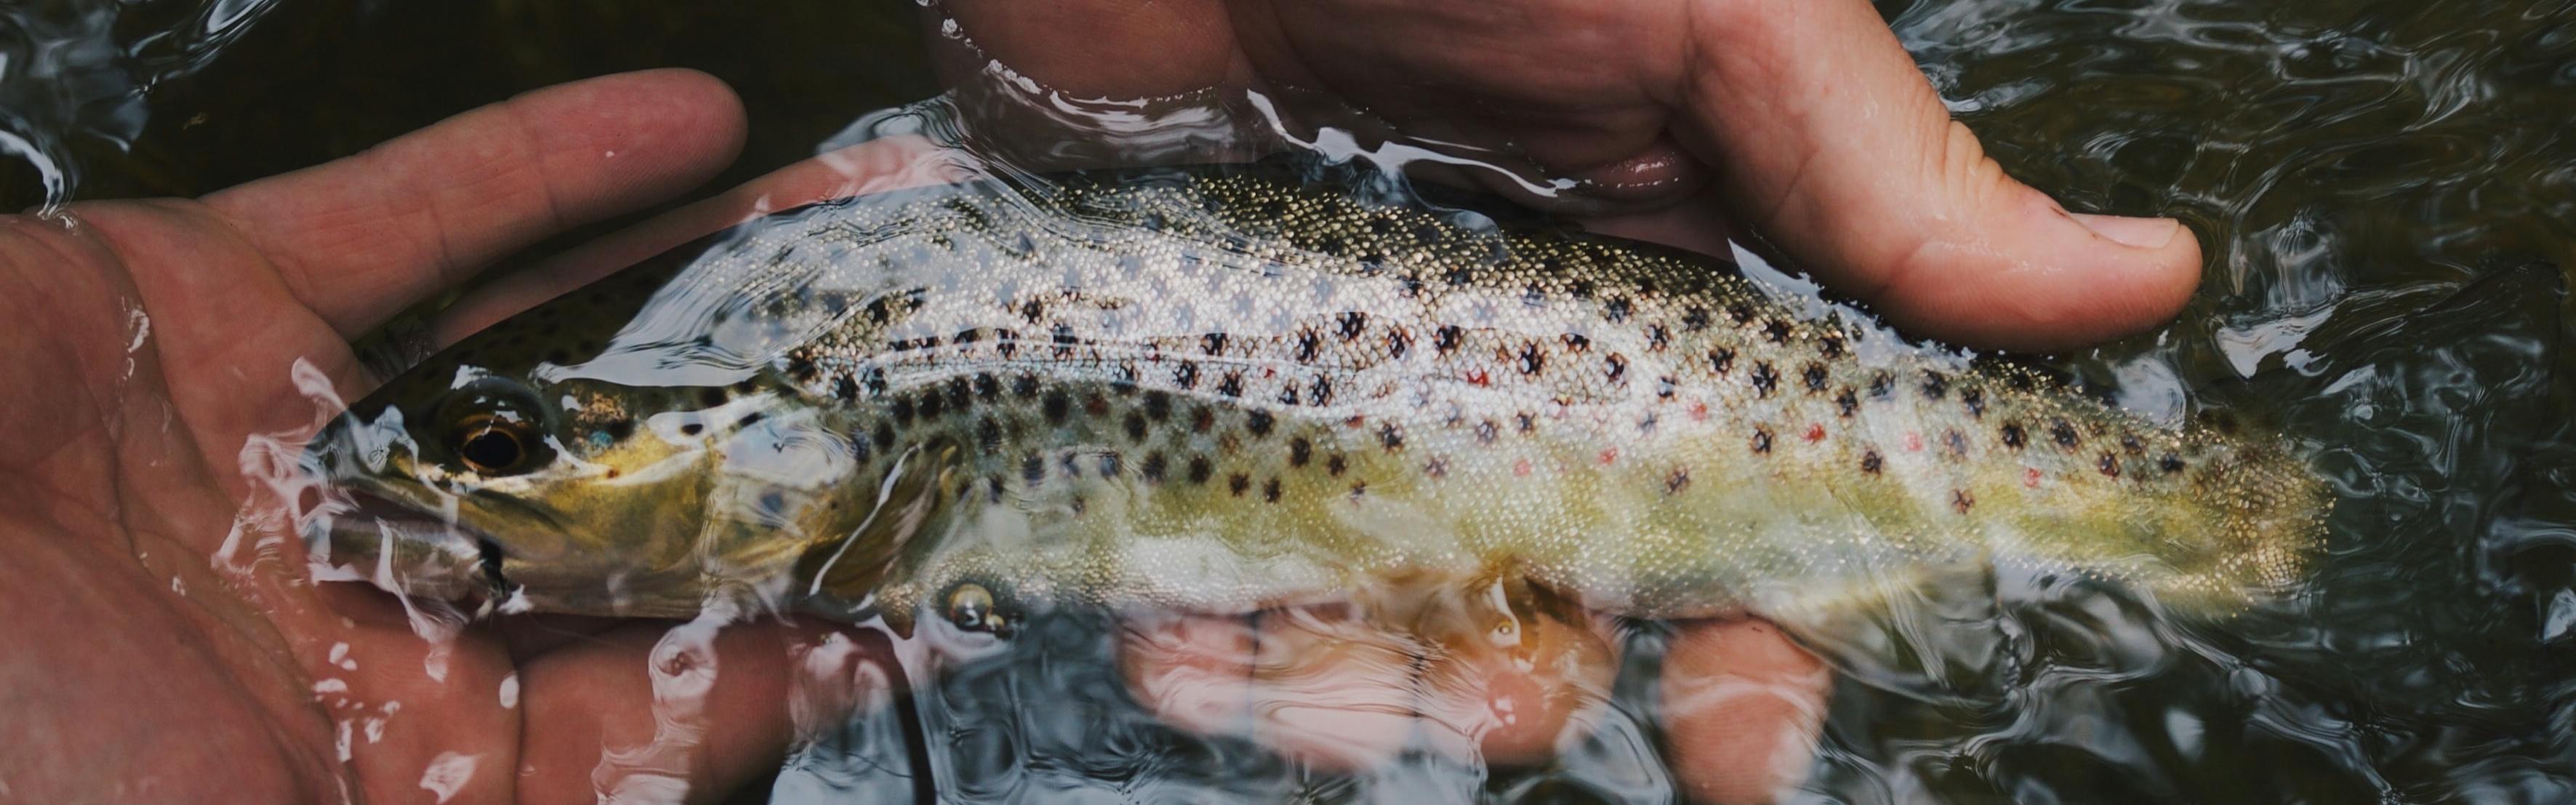 10 of the best trout rods